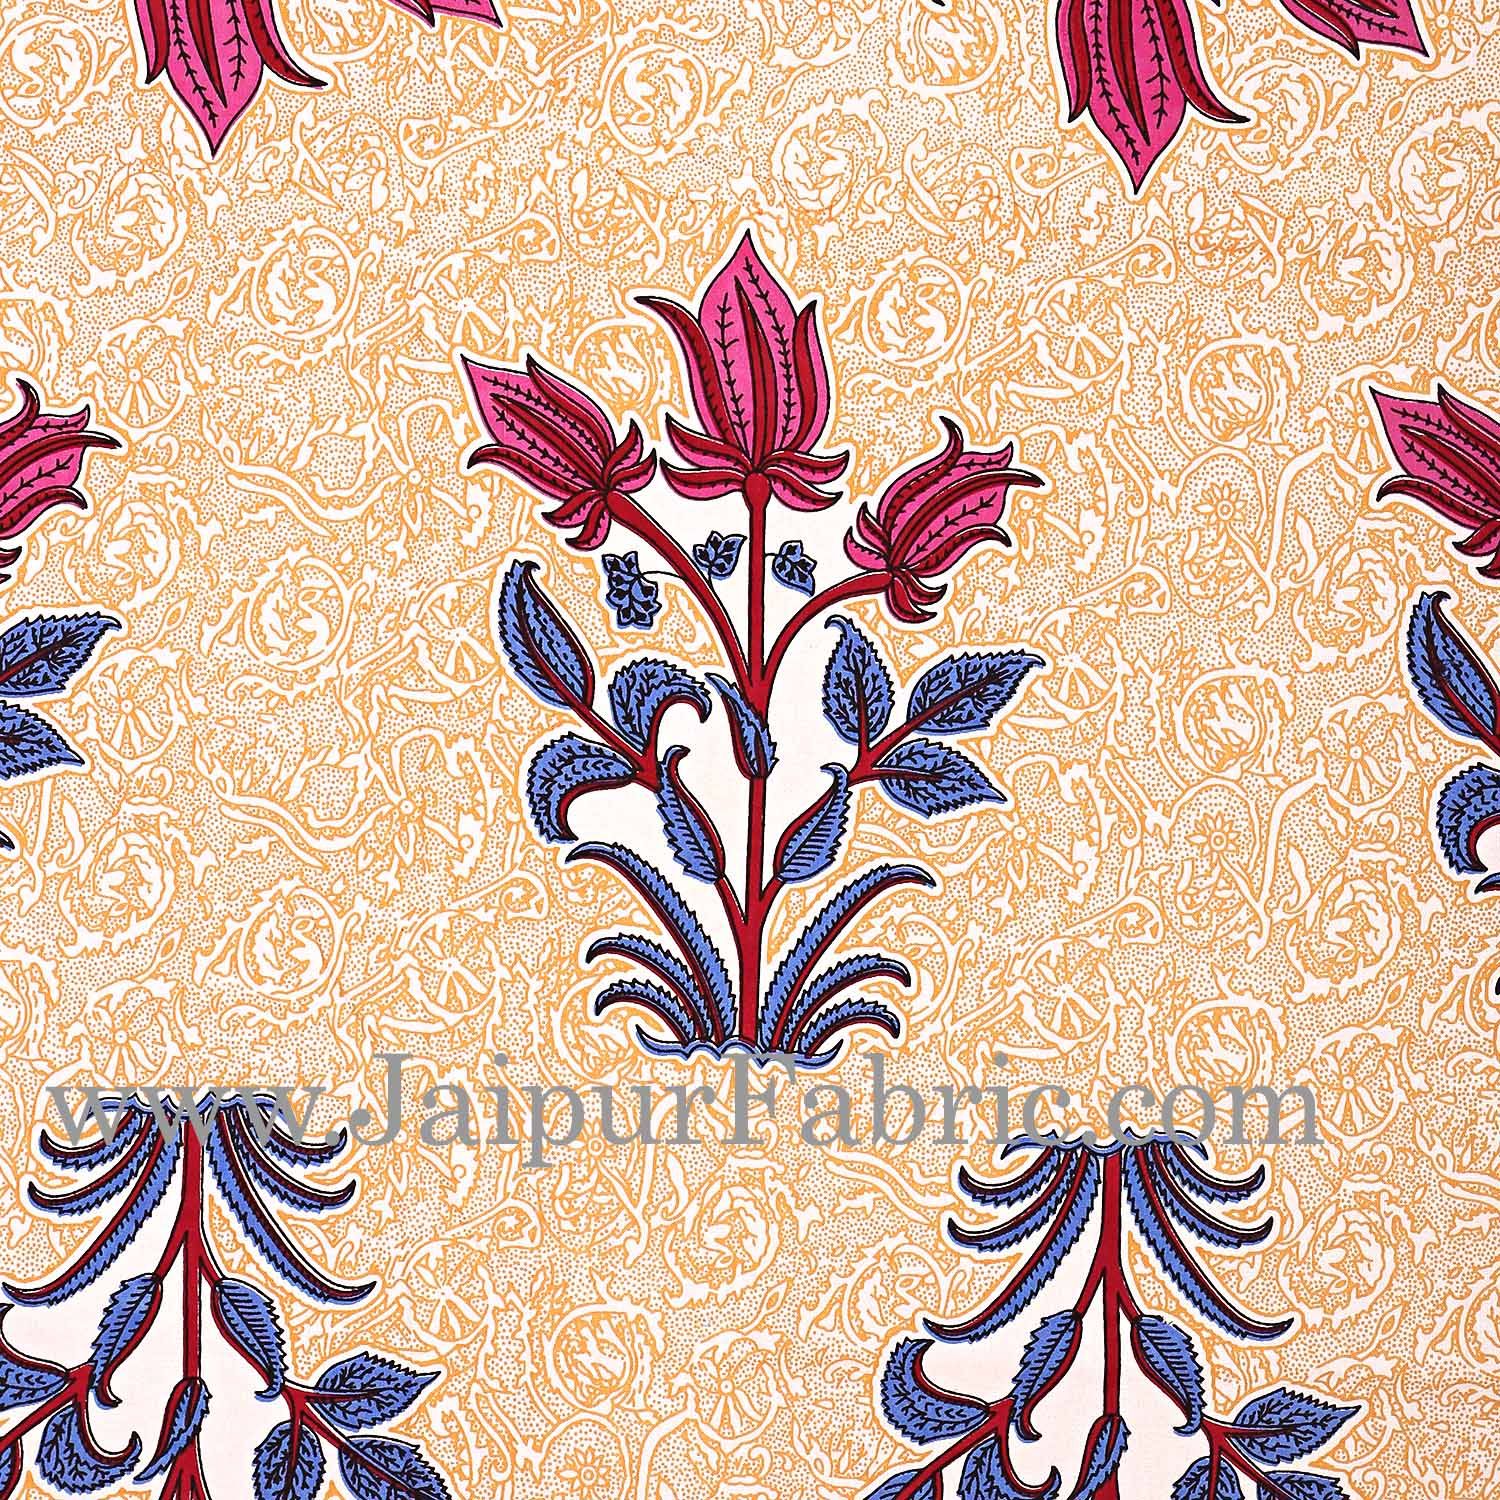 Dark Pink Border with Bail and Gamla cream base bud and leaf print cotton double bedsheet